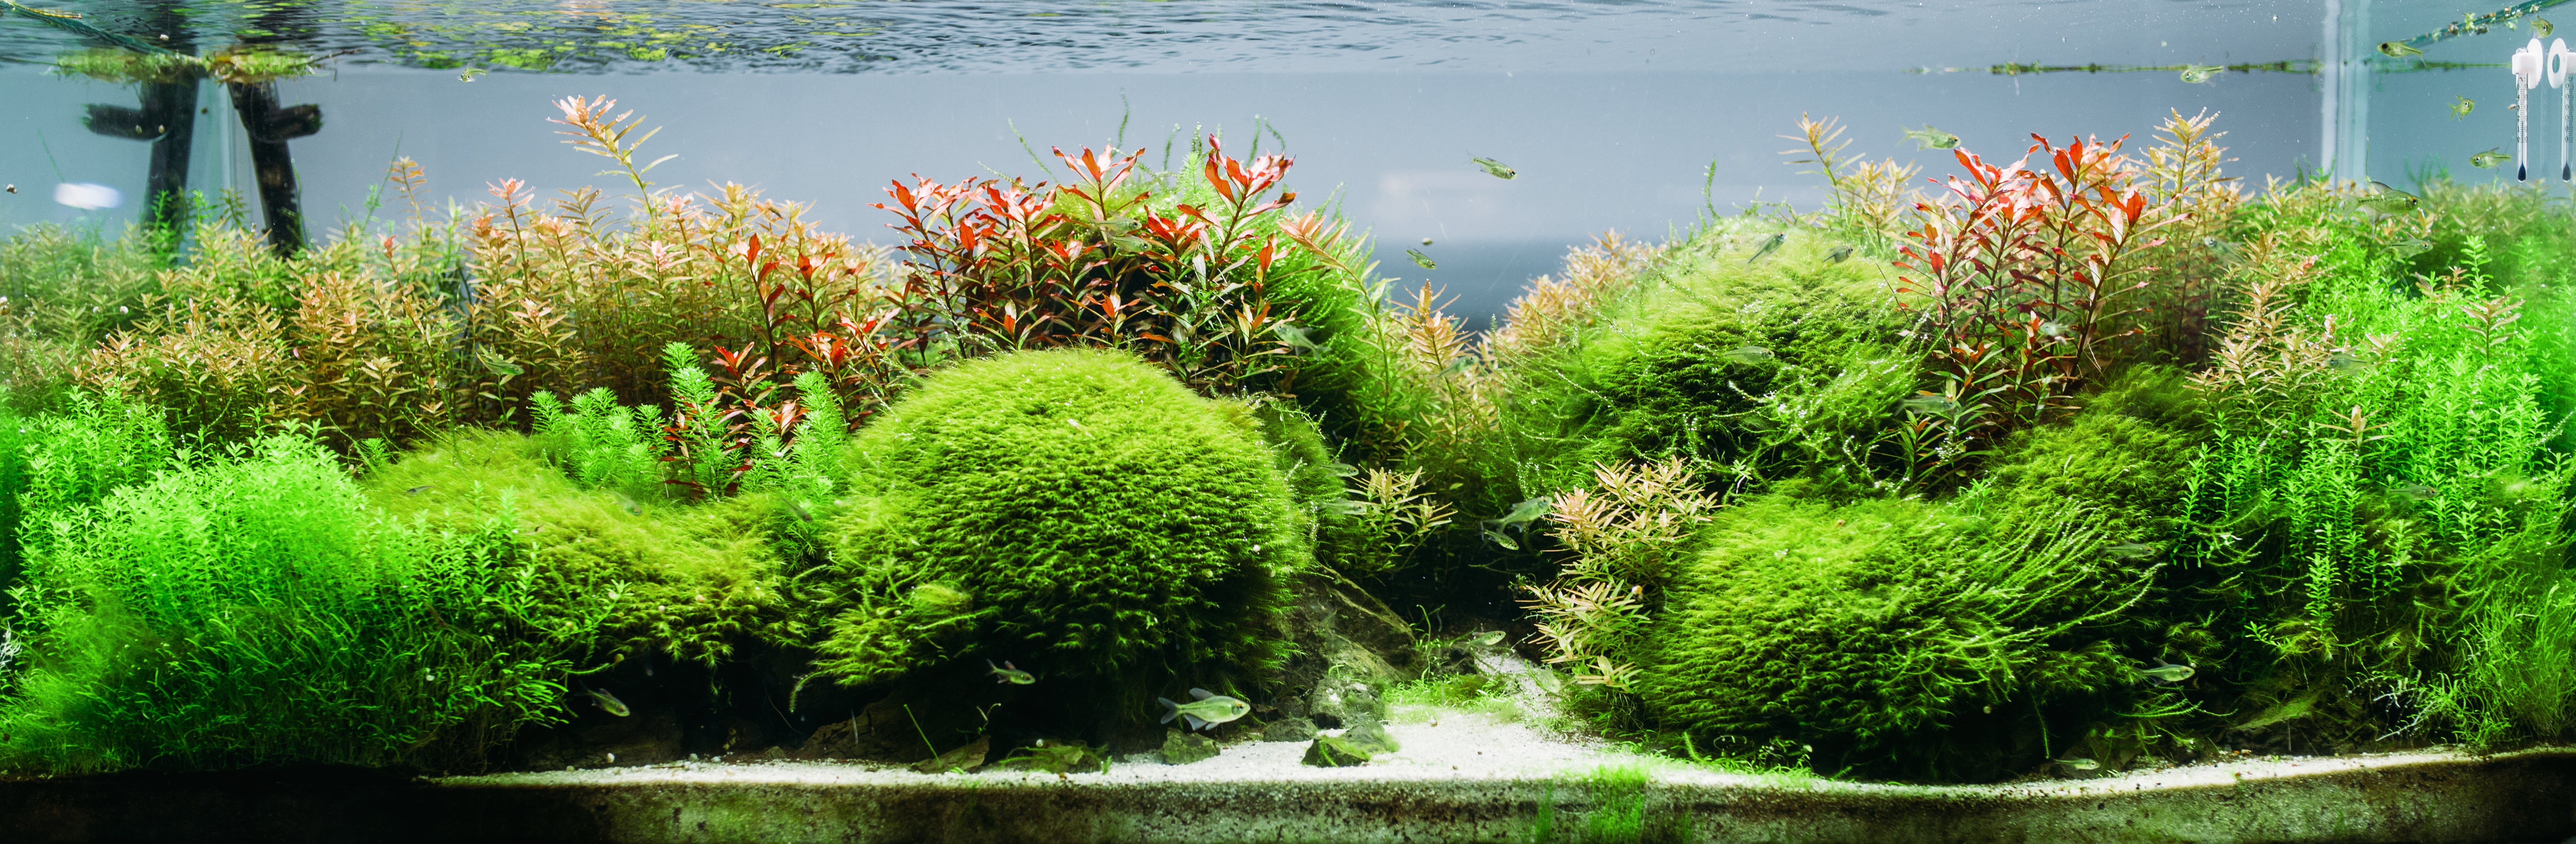 Java Moss Care Guide: Uses, Growth, Tank Requirements, etc. • Aquarium  Fishes